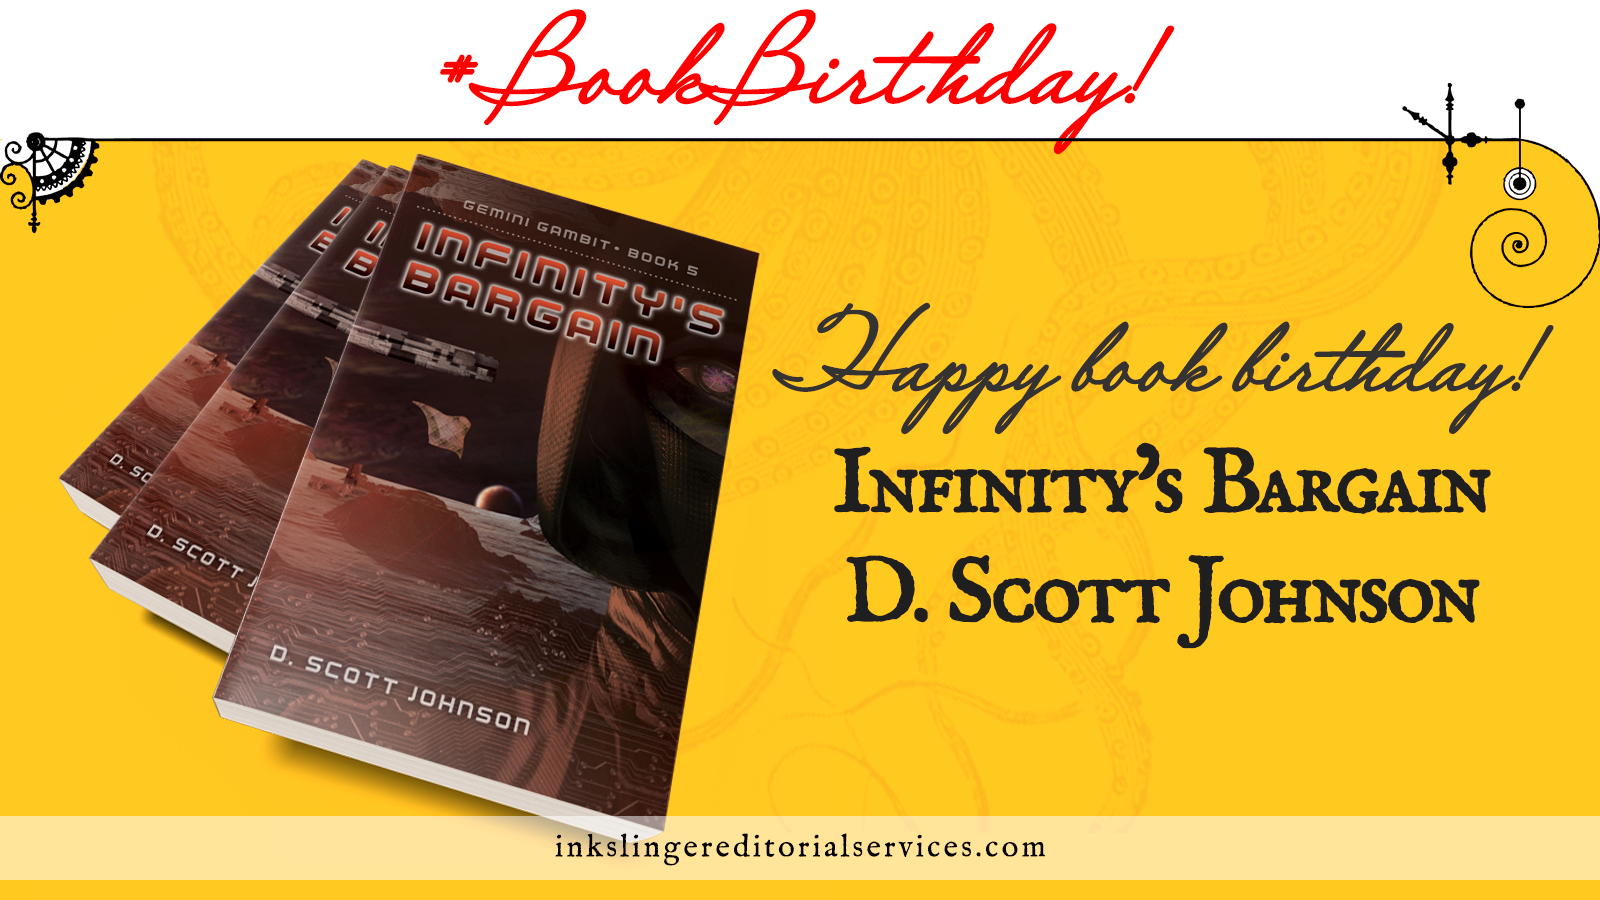 #BookBirthday! Happy book birthday to D. Scott Johnson on the release of Infinity's Bargain, book 5 in the Gemini Gambit series! A stack of three books over a yellow field with steampunk elements.